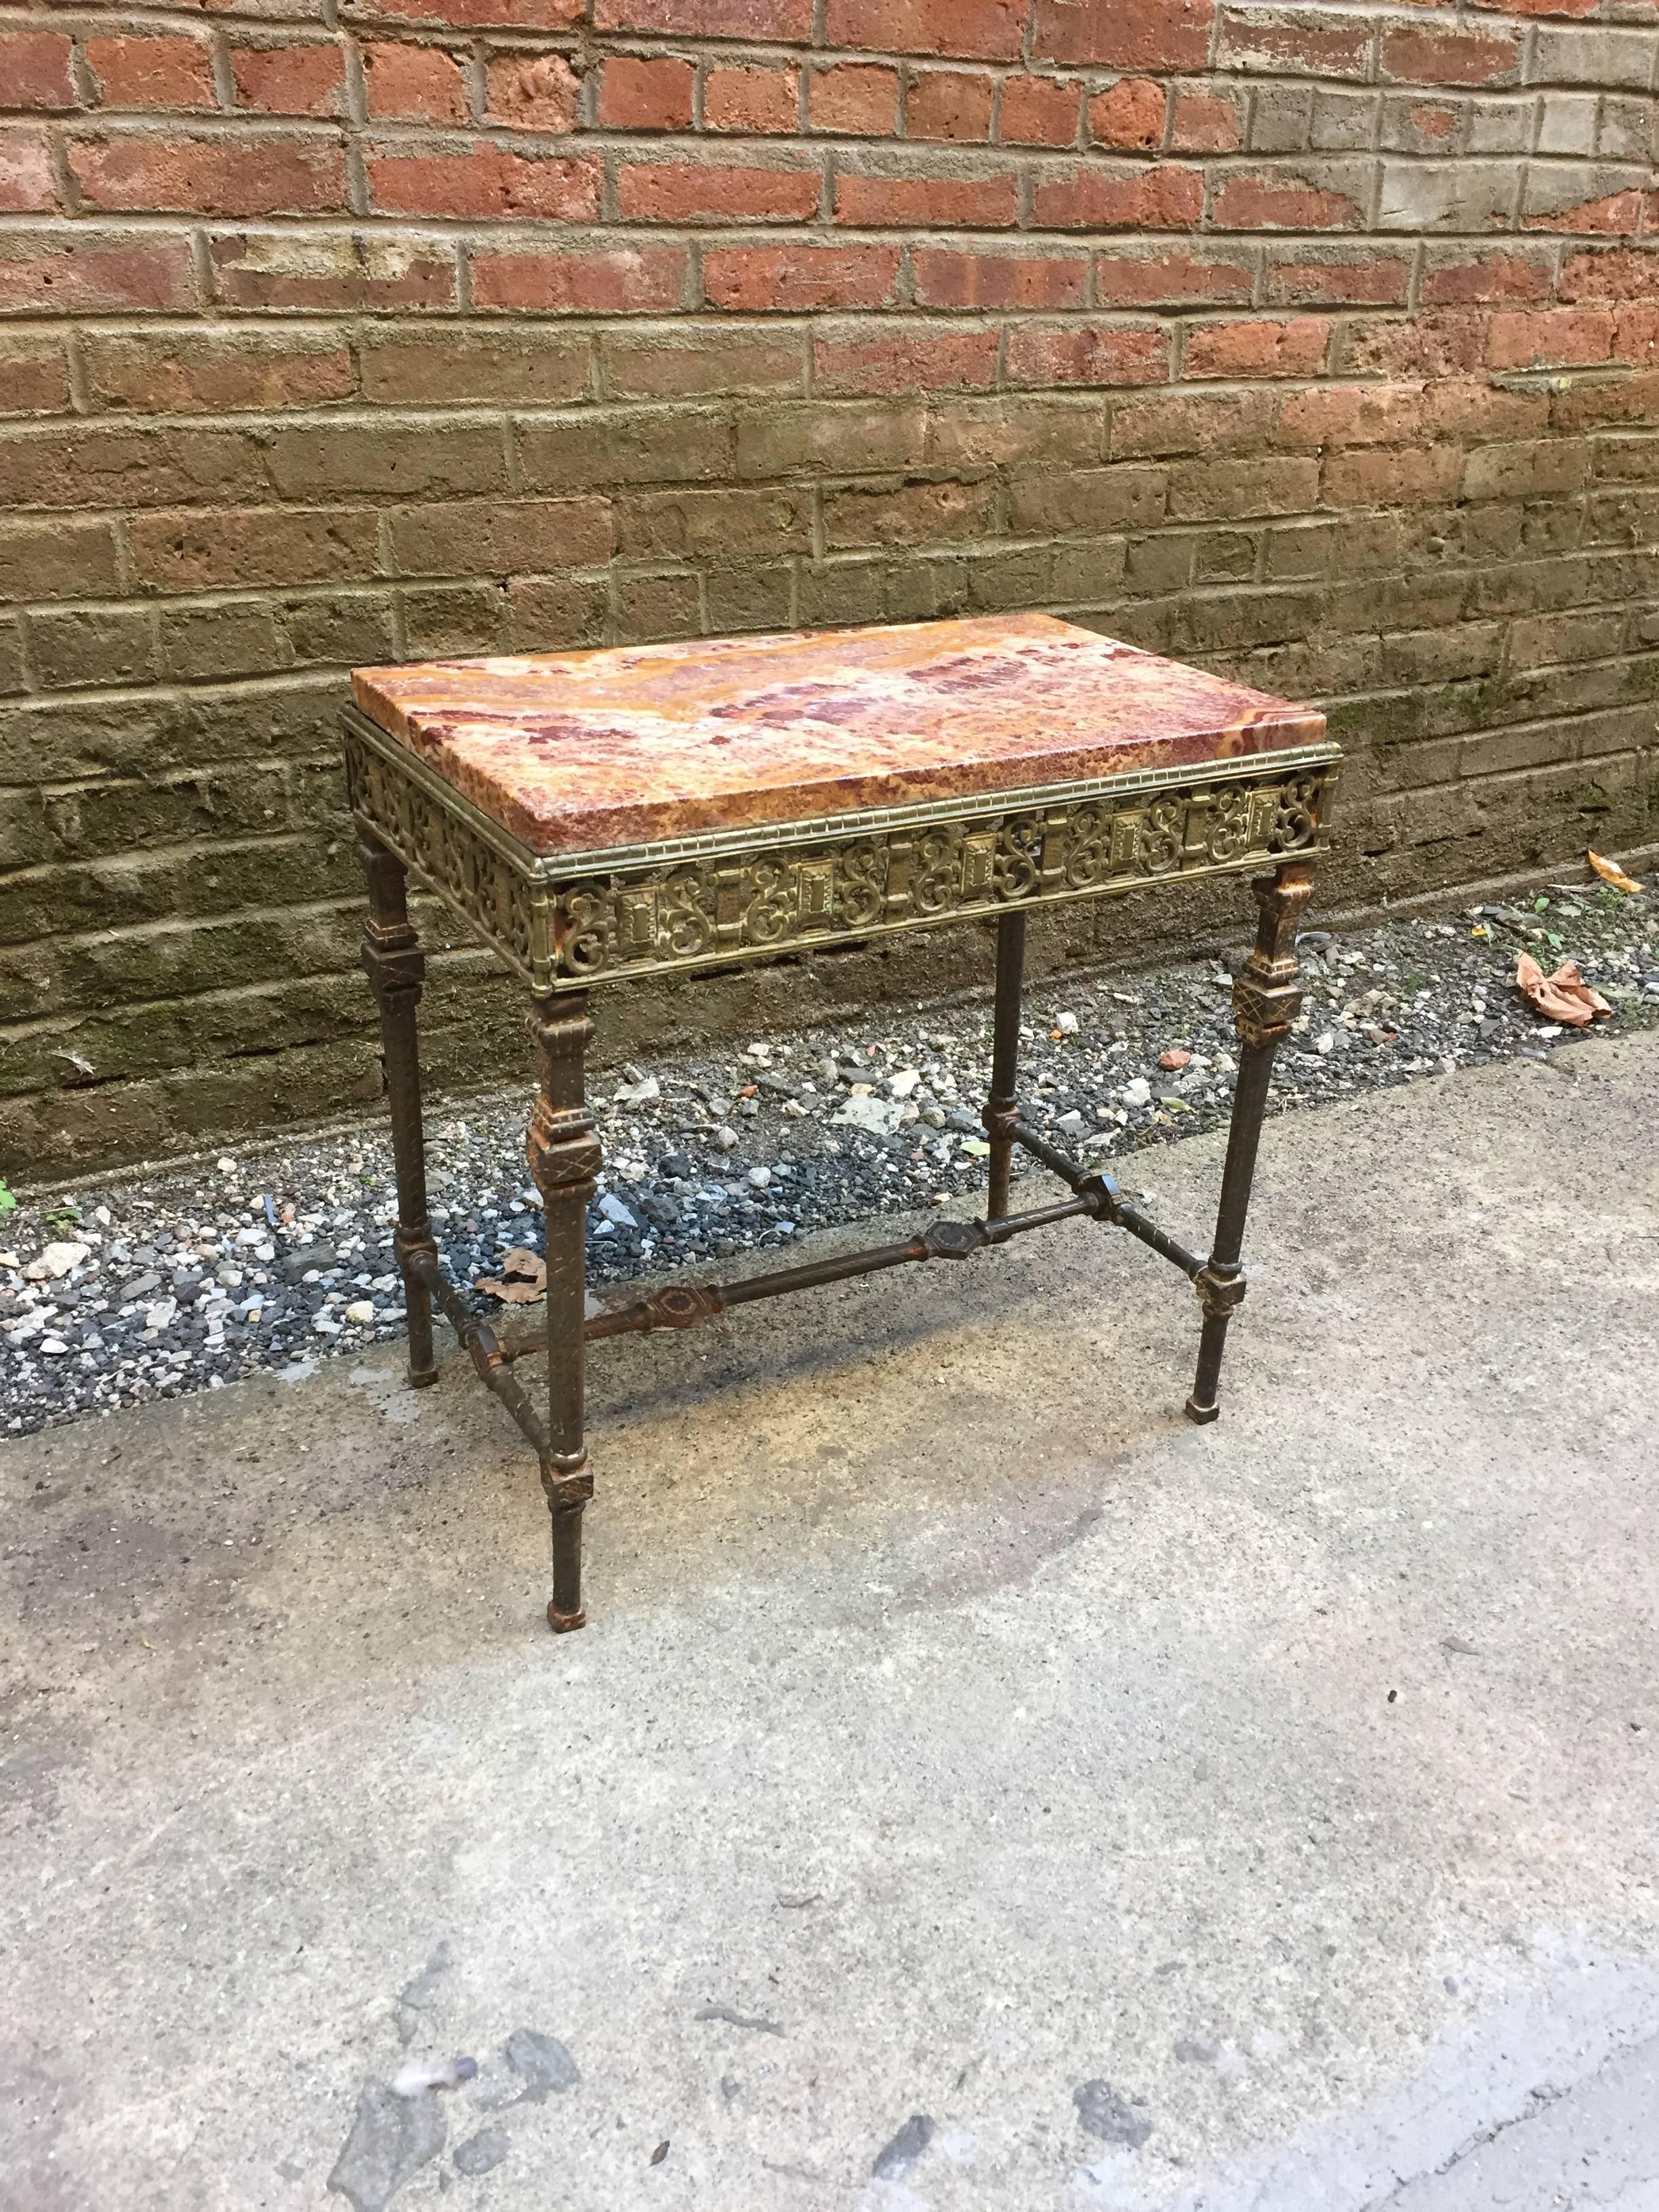 Wonderful cast iron and marble-top table in the style of Oscar Bach. Iron frame with rope twist legs, stretcher base and scrolled and cartouche decorated apron, circa 1910-1920.